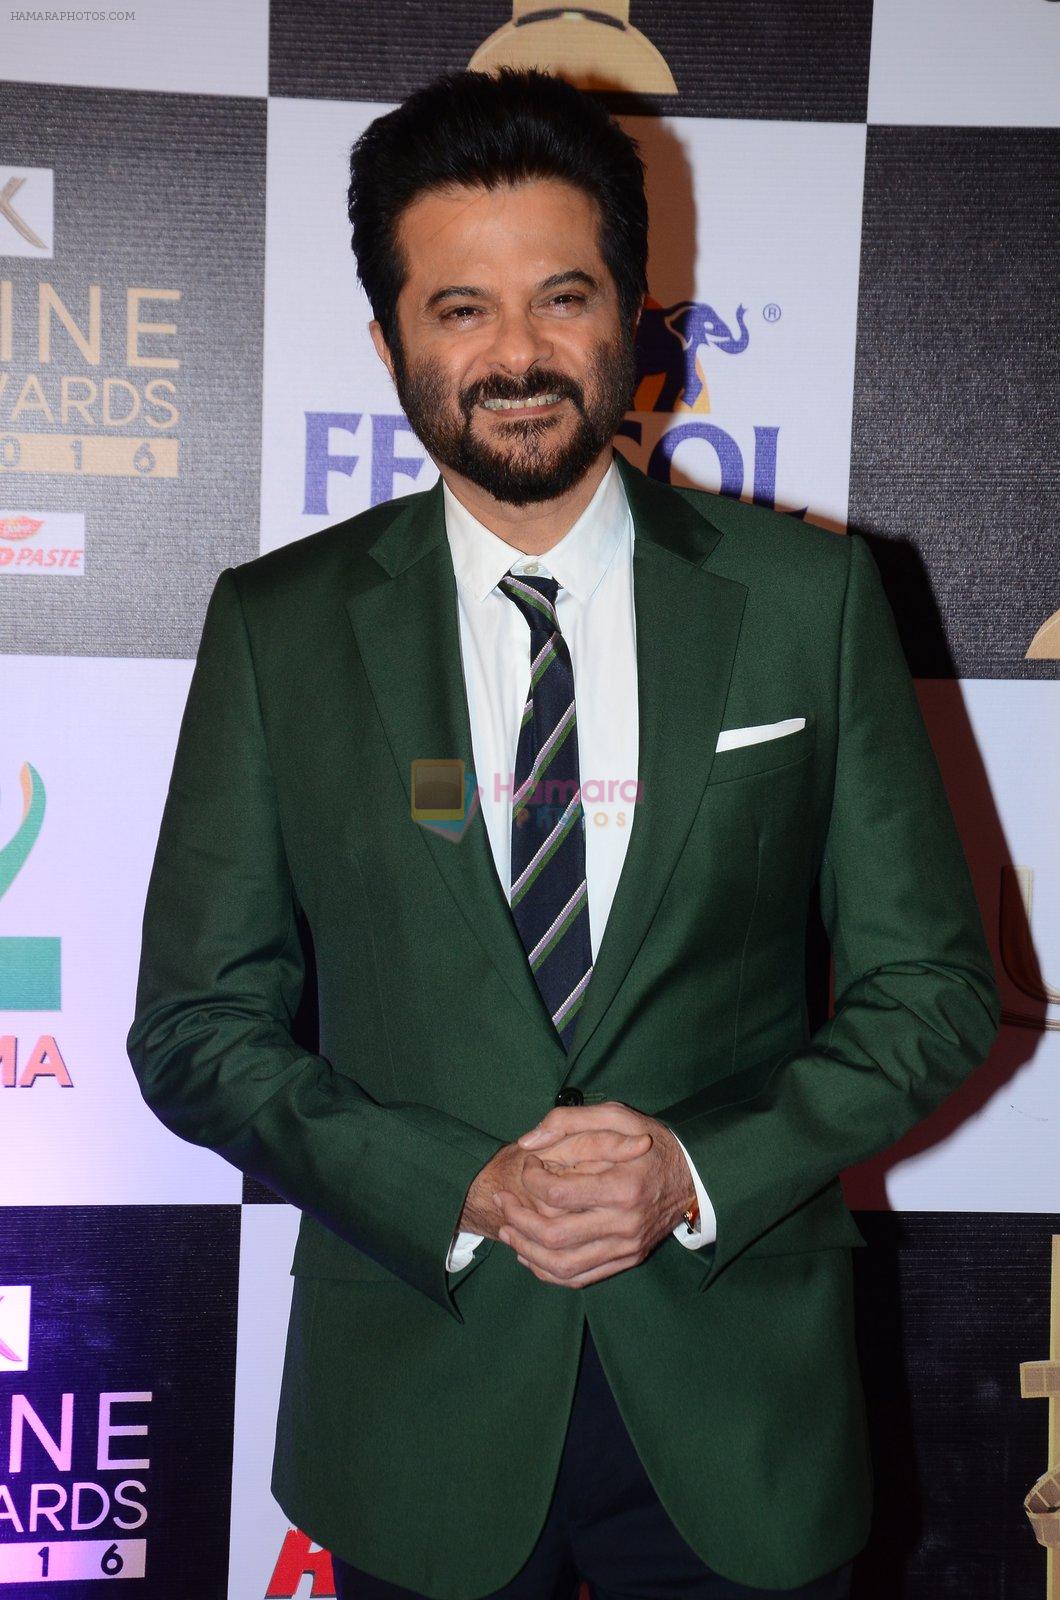 Anil Kapoor at zee cine awards 2016 on 20th Feb 2016